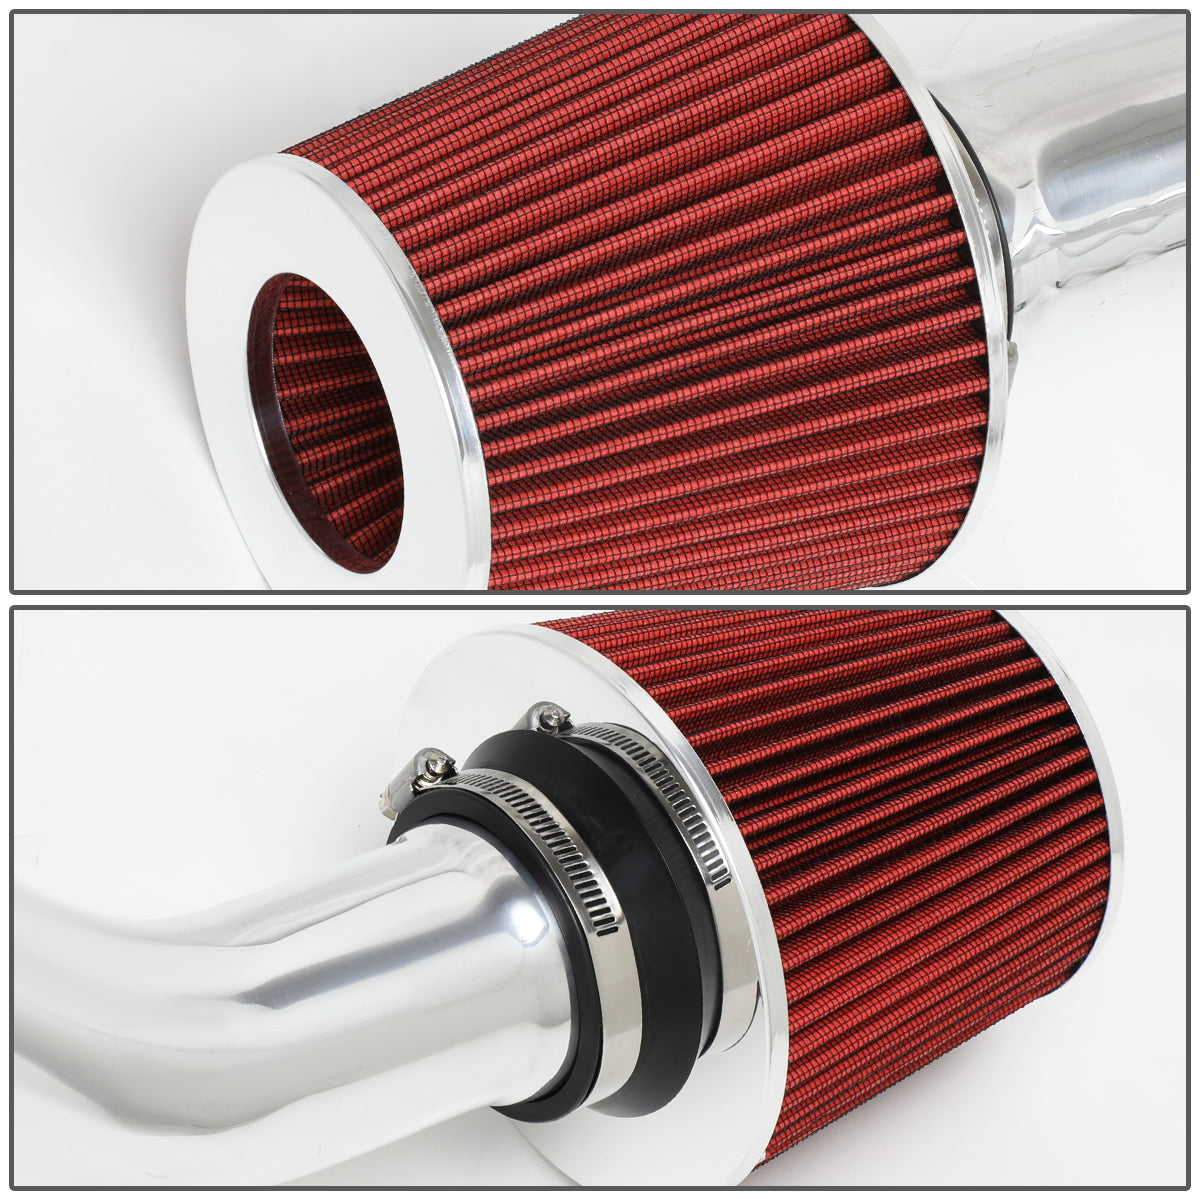 04-06 Nissan Maxima Aluminum Cold Air Intake w/Red Cone Filter